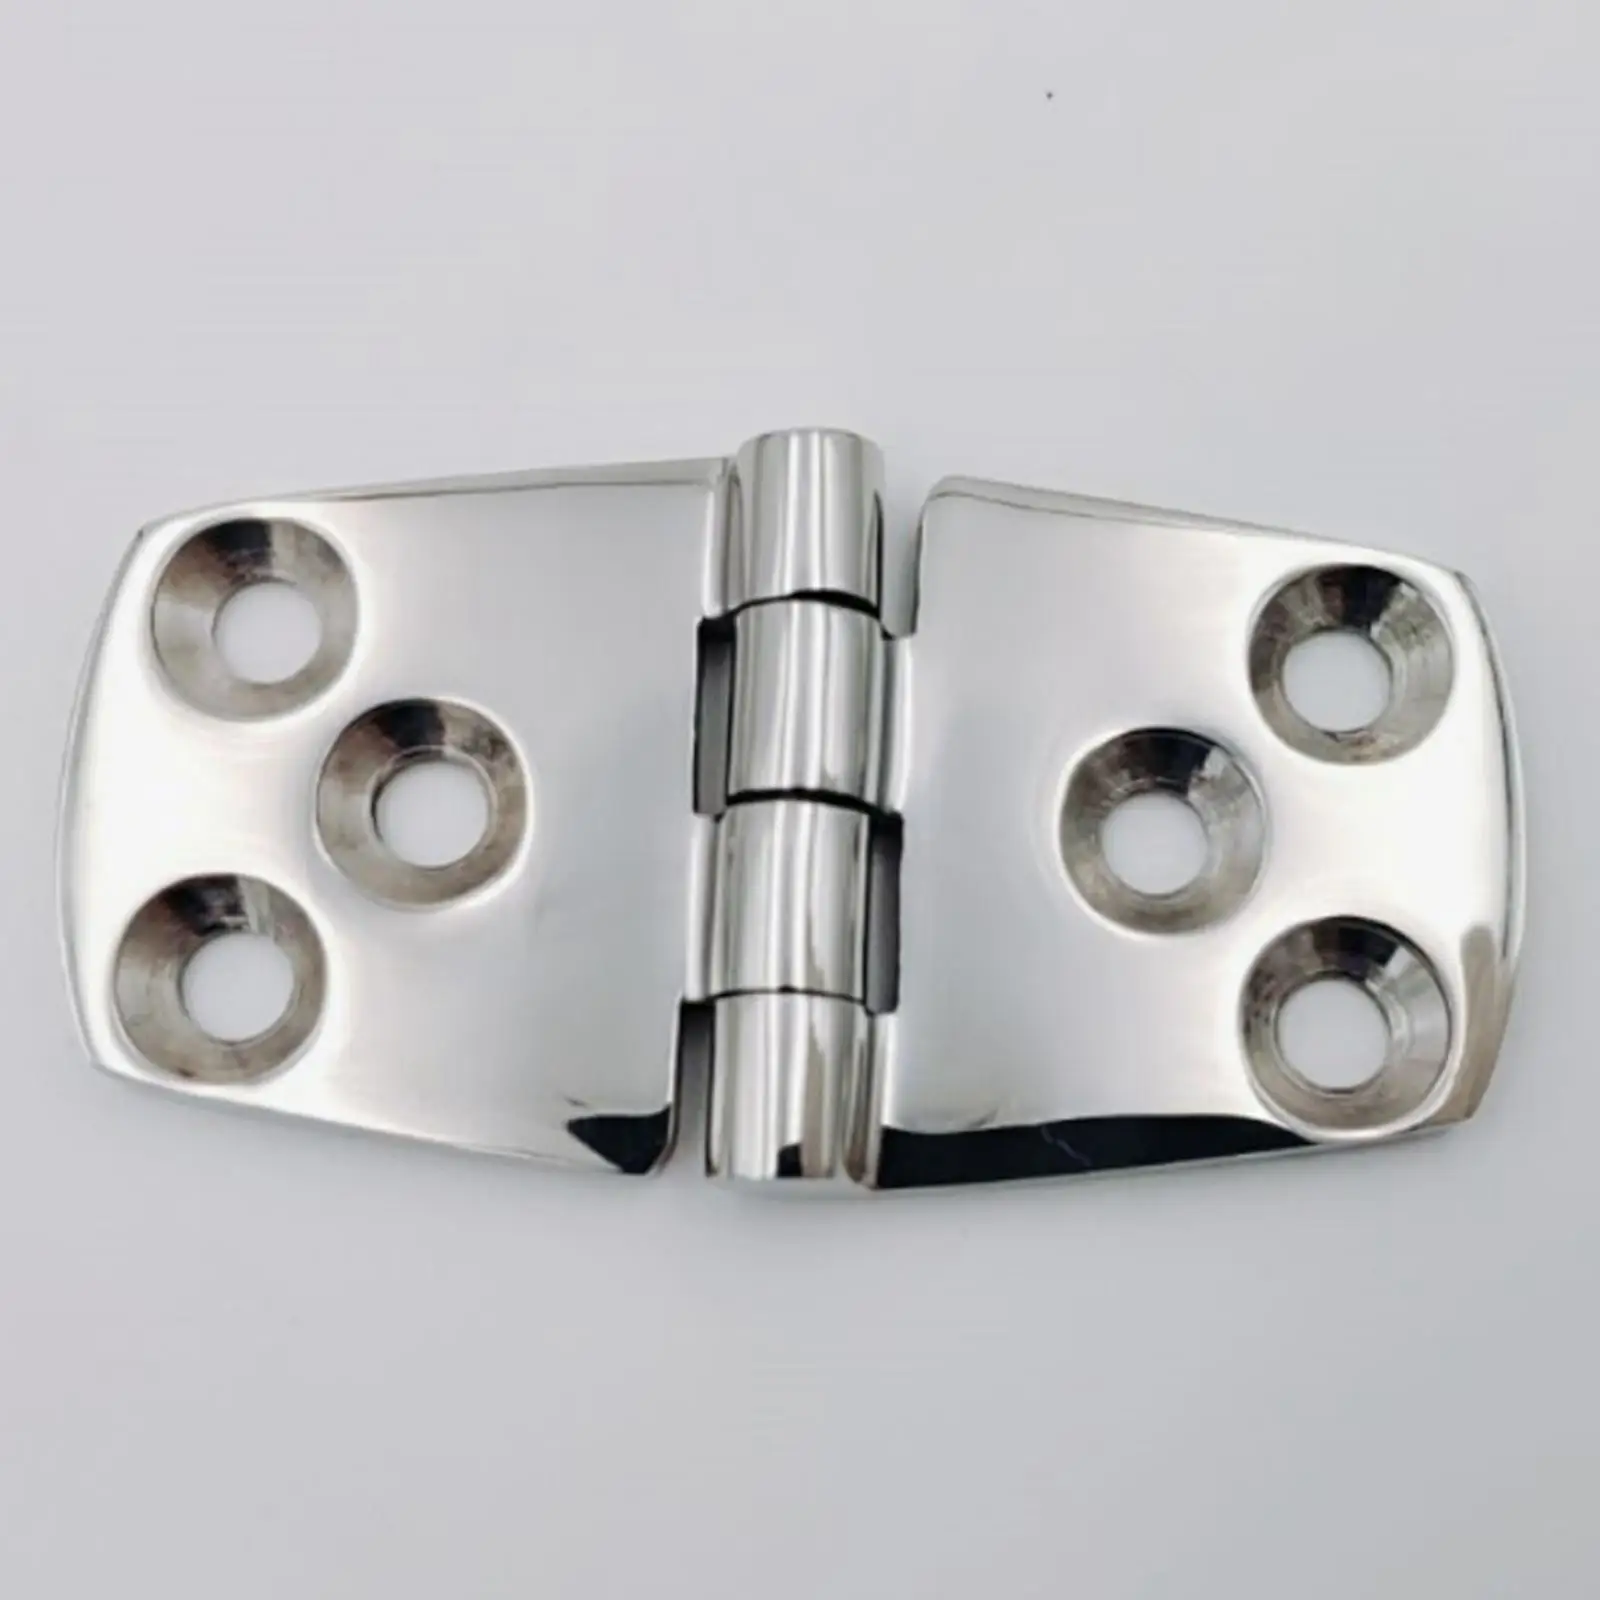 Marine Hinge Accessory Casting Mirror Polished for Cabinet Folding Door Deck